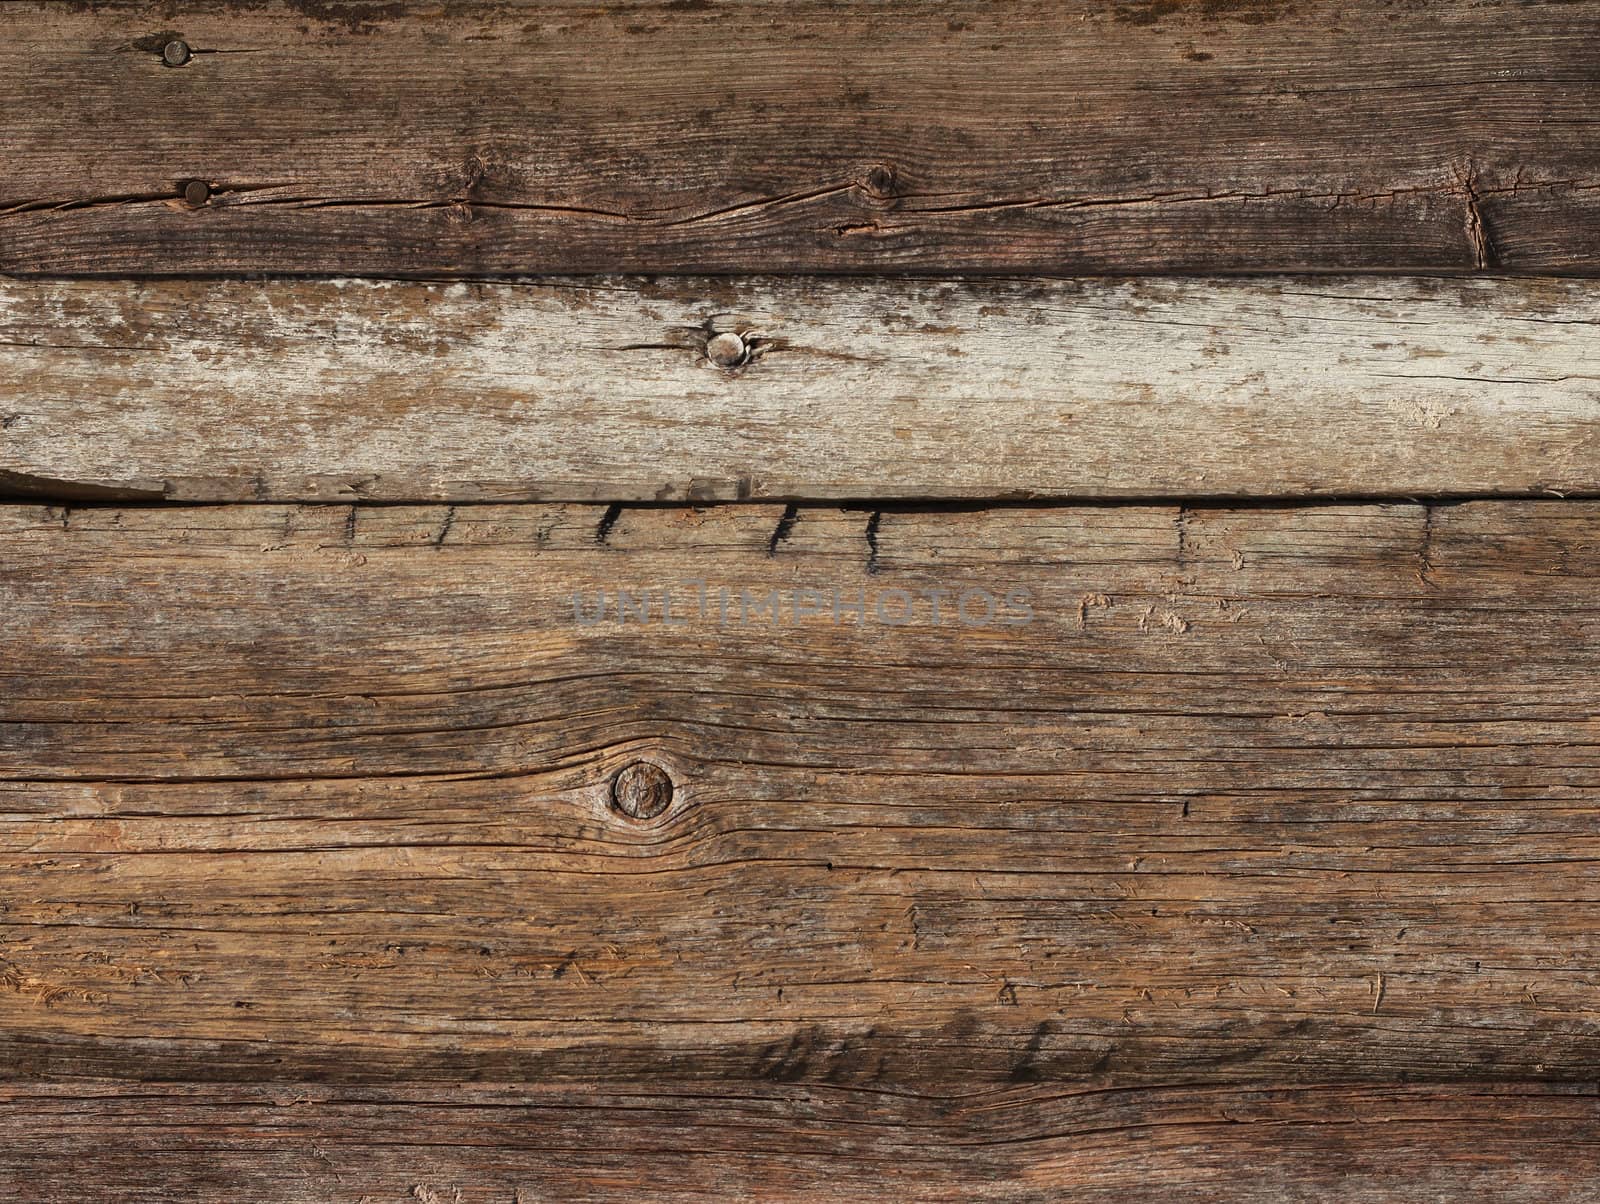 Old weathered plank wood by anterovium